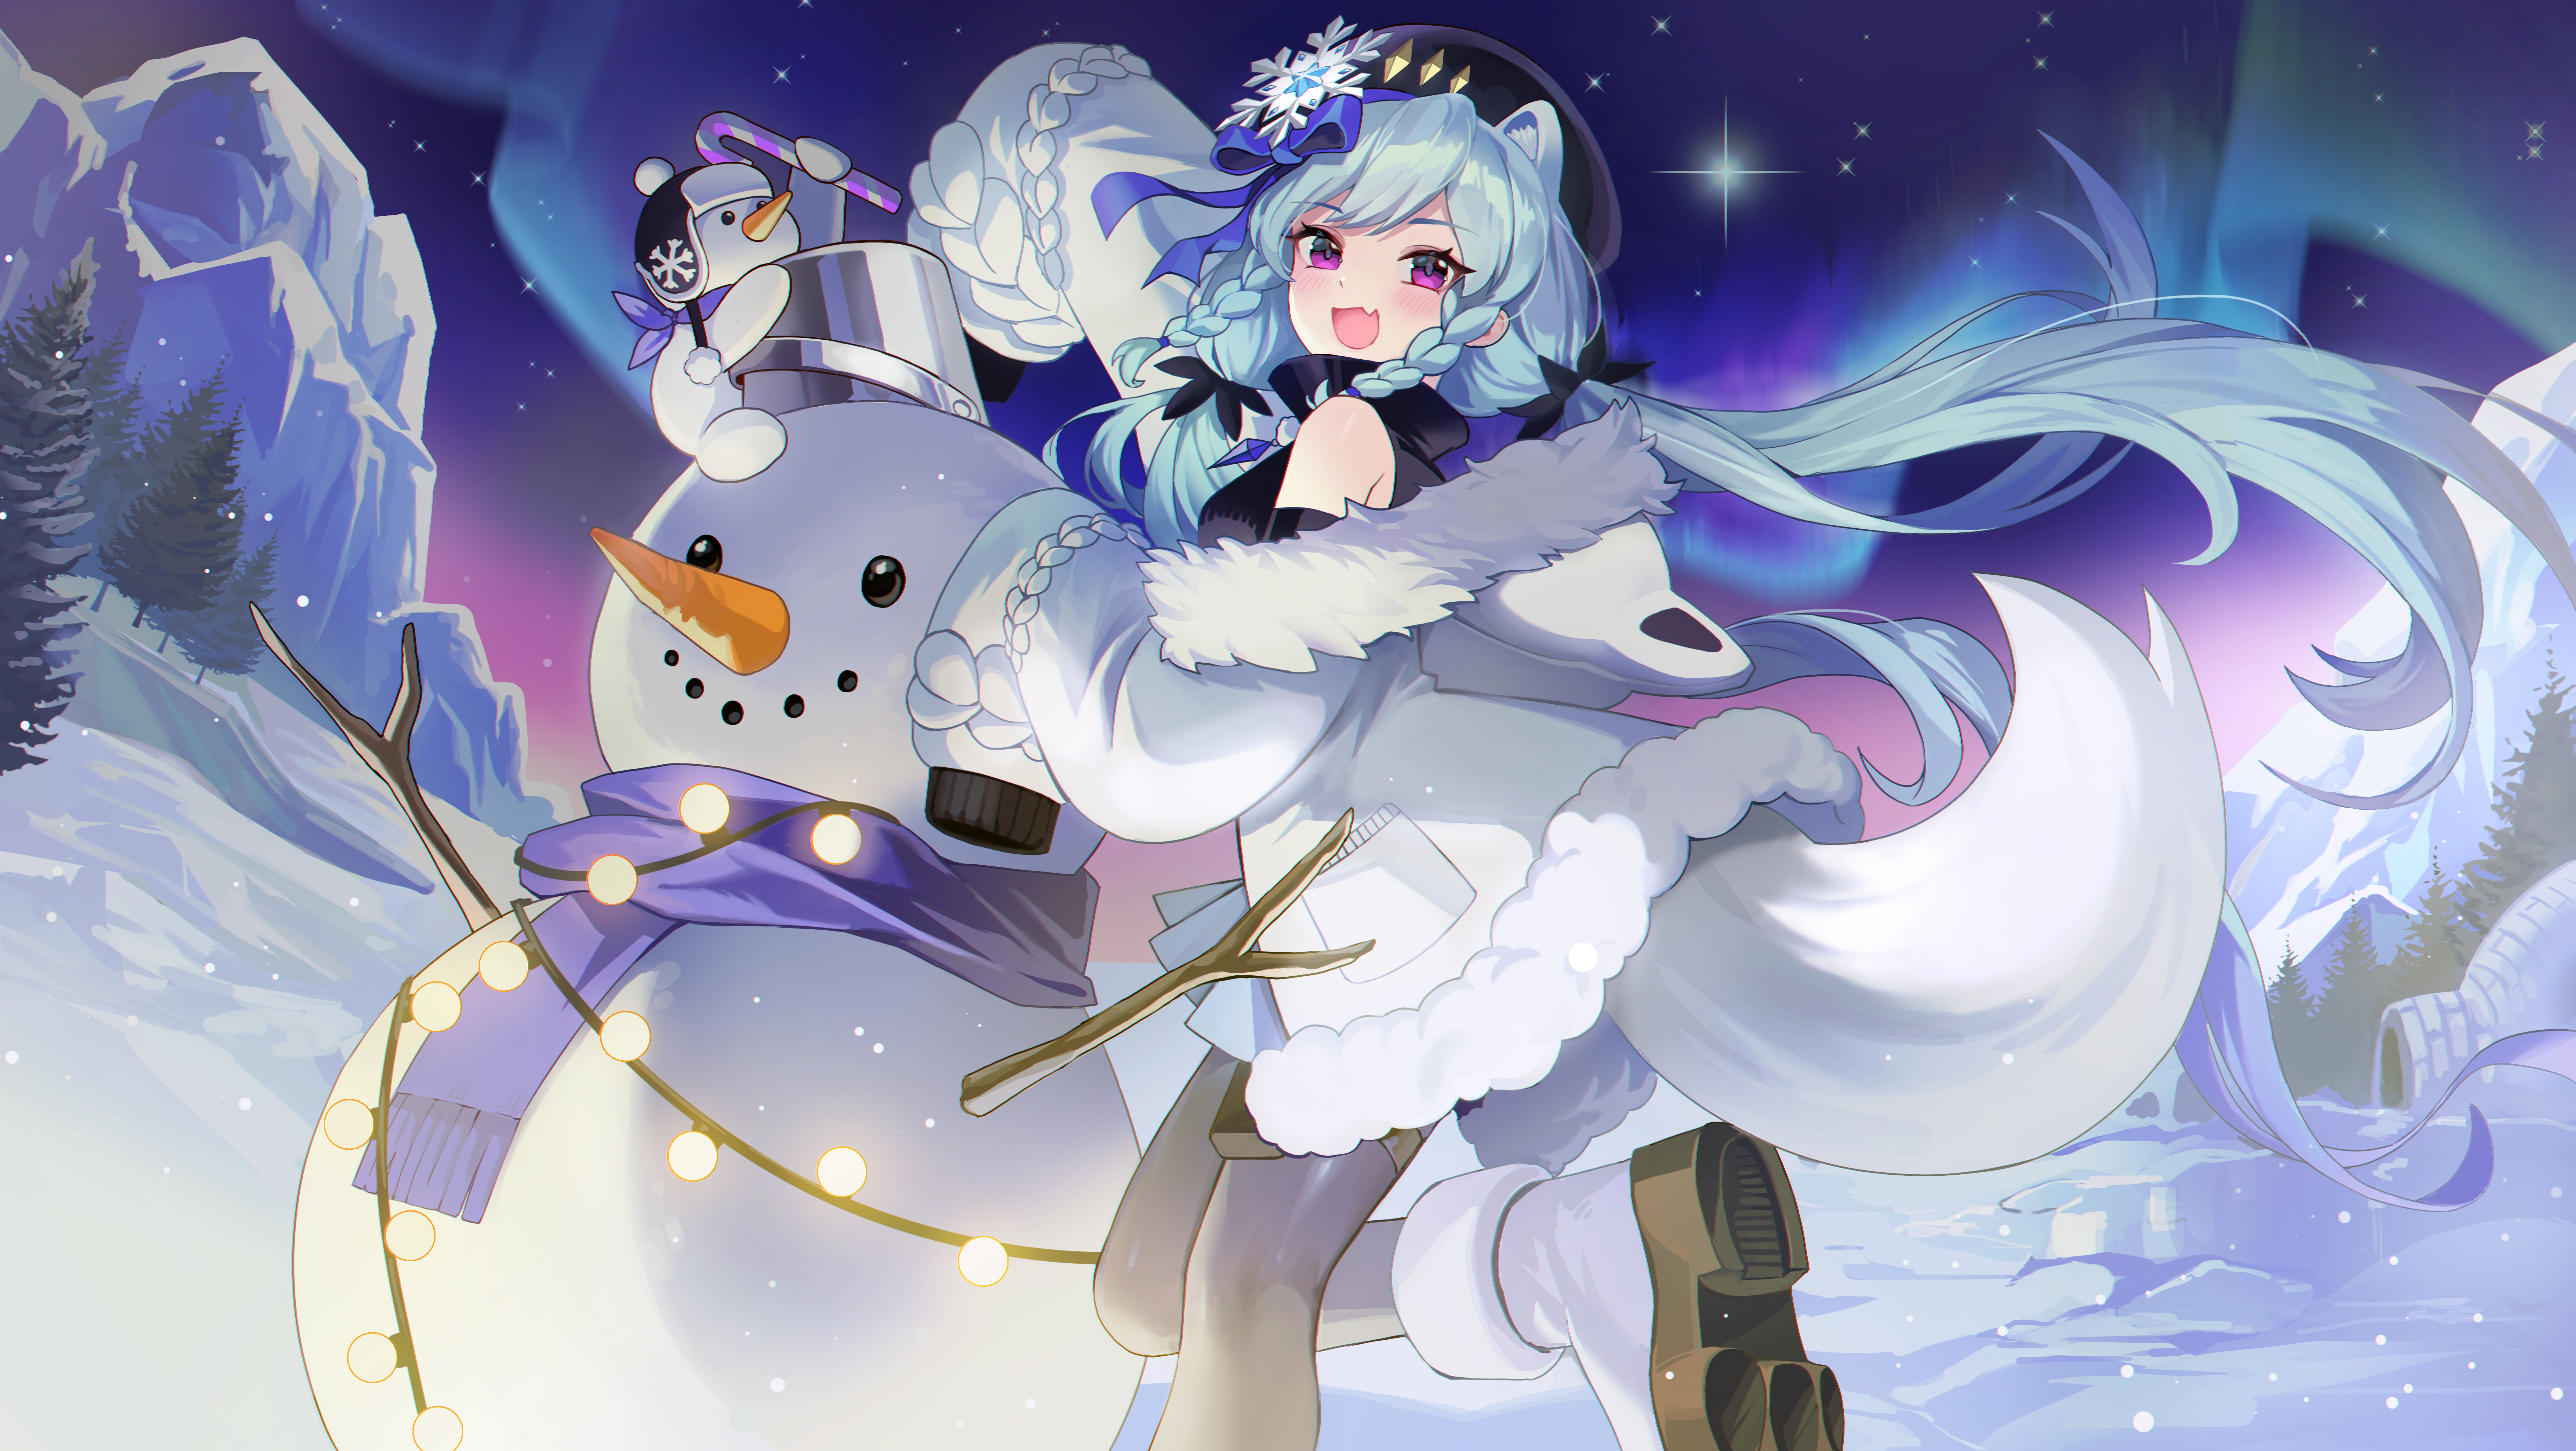 Anime 7057x3974 anime anime girls Pixiv snow fox girl tail original characters looking at viewer long hair shoe sole open mouth hat women with hats outdoors women outdoors night sky stars winter scarf fur fur trim red eyes blue hair hair bows fox ears fox tail snowman carrots lights aurorae boots trees coats off shoulder igloo candy cane